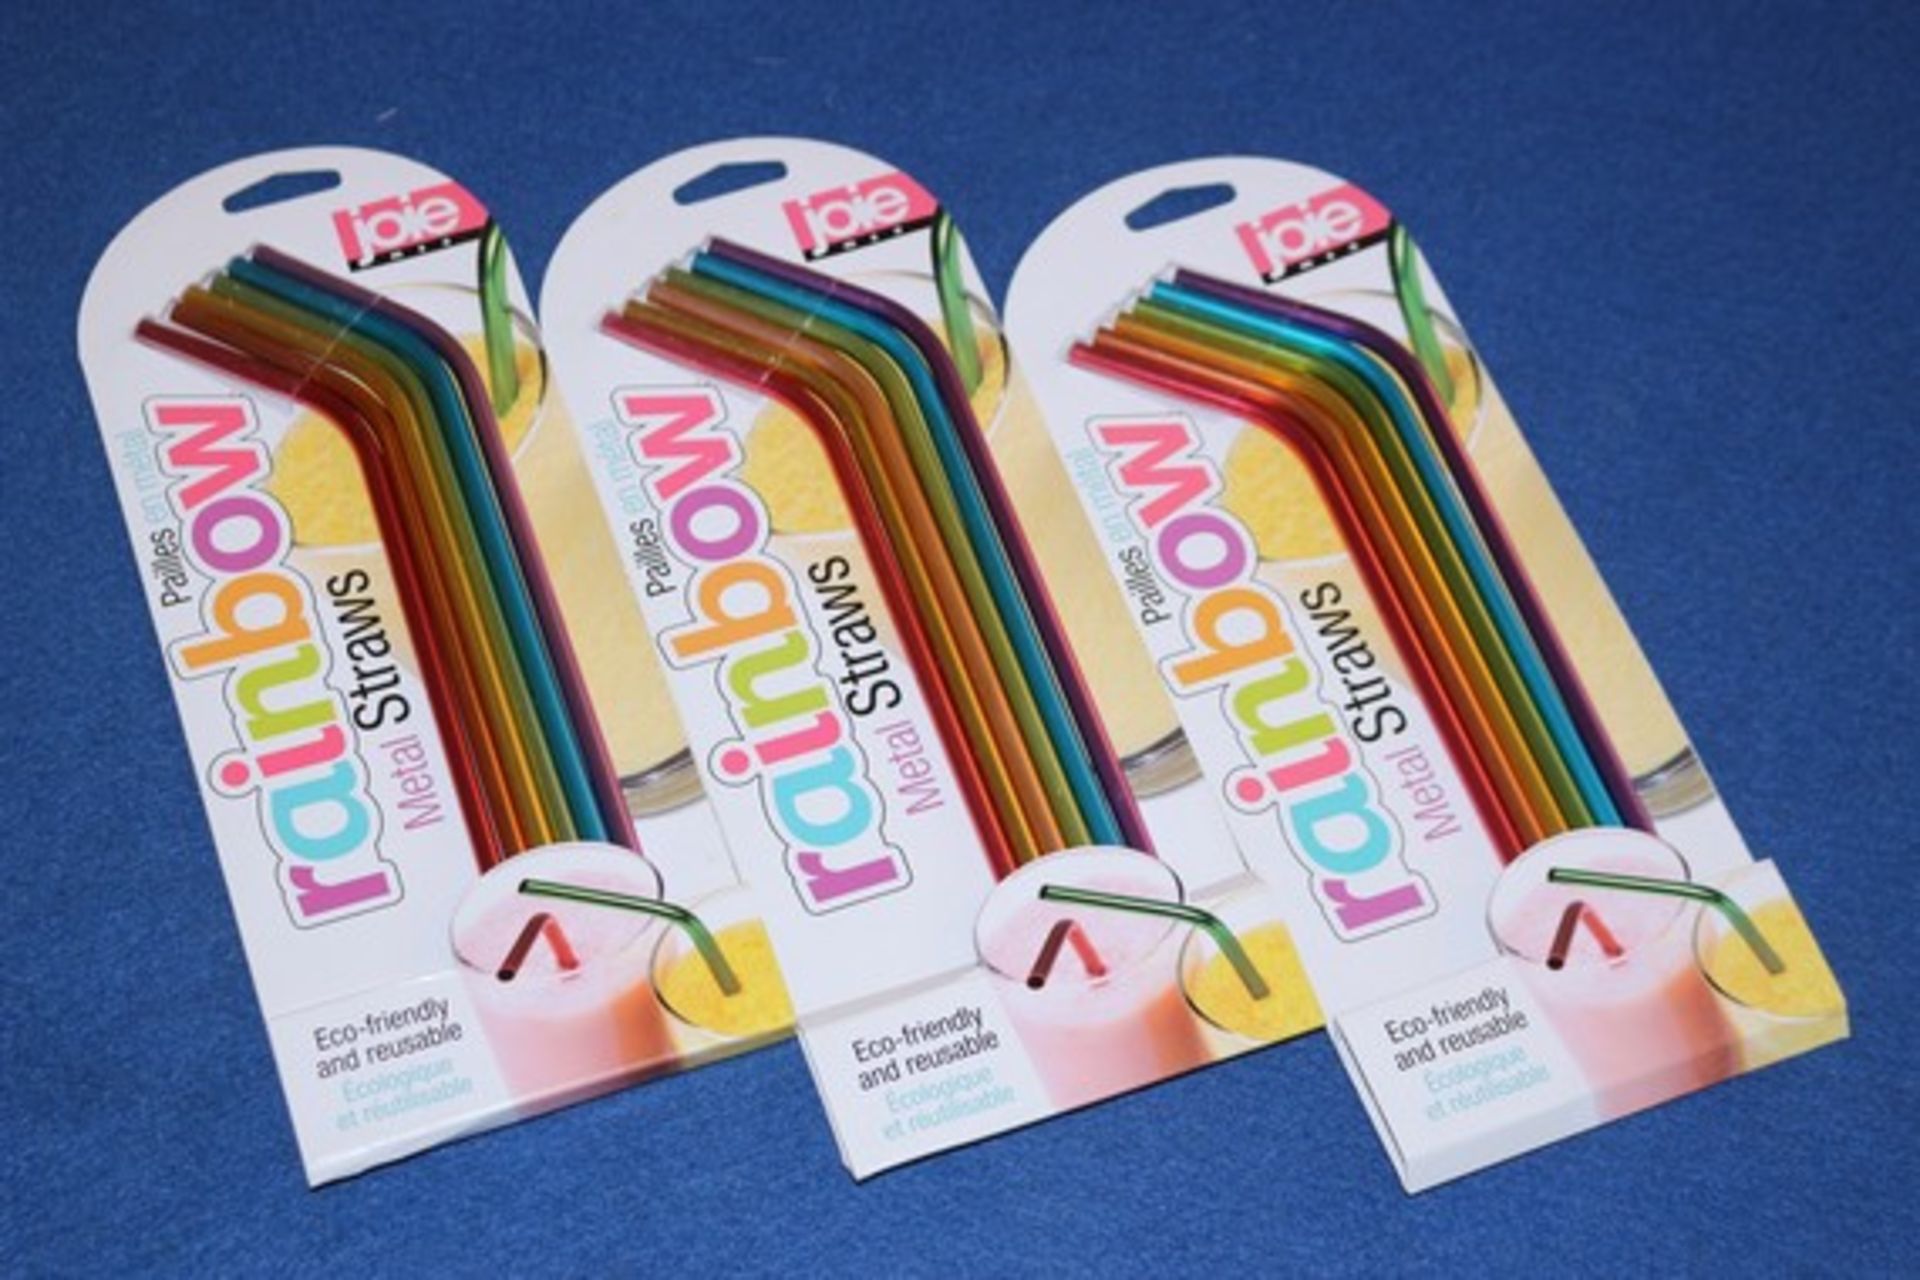 10 x SETS OF JOIE RAINBOW METAL STRAWS (06.08.18) (36) *PLEASE NOTE THAT THE BID PRICE IS MULTIPLIED